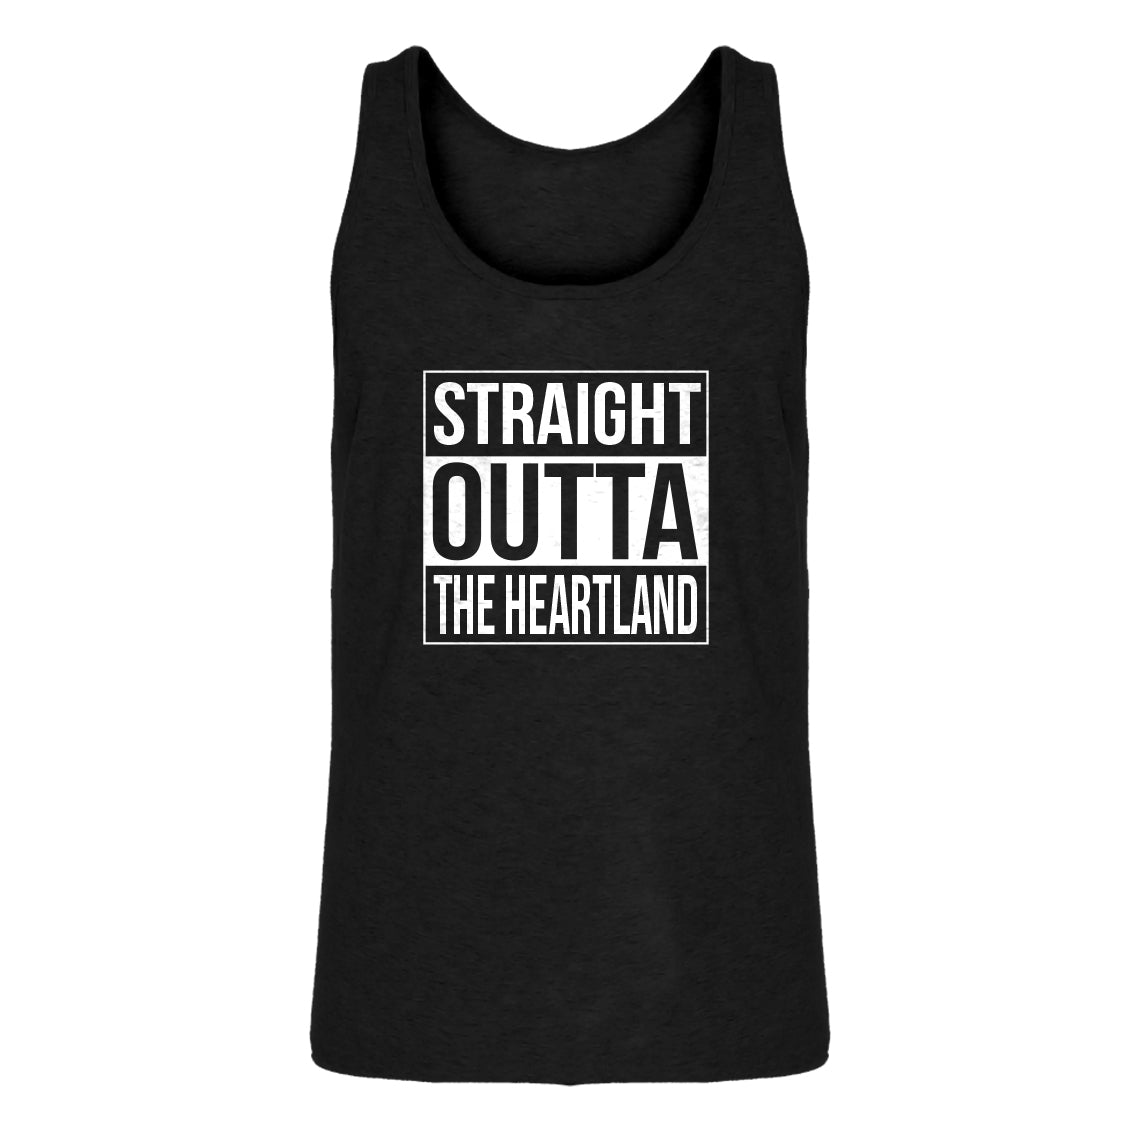 Mens Straight Outta the Heartland Jersey Tank Top